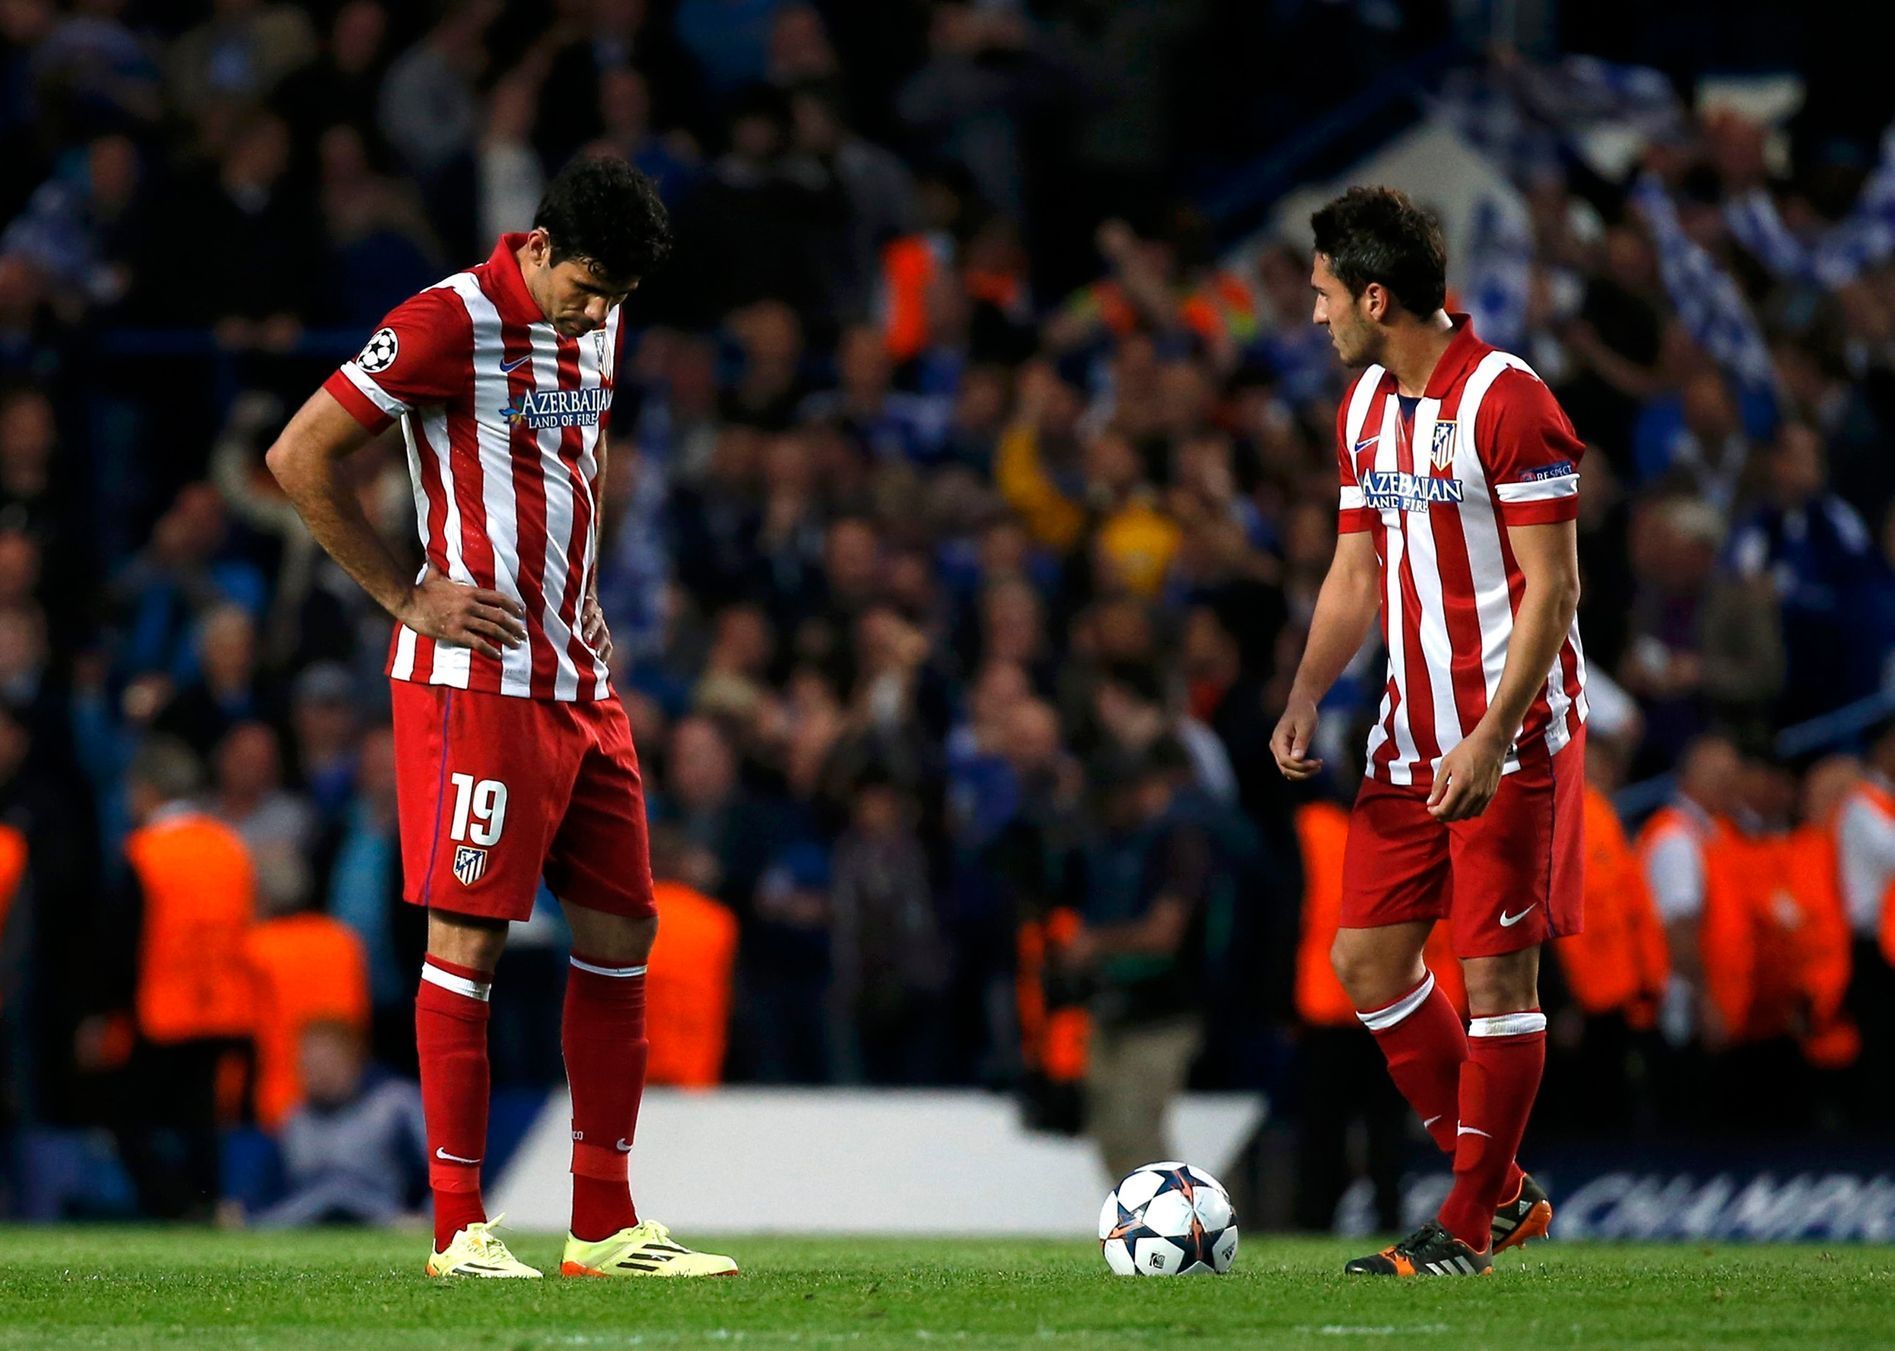 Atletico Madrid's Costa and Koke react after Chelsea scored the first goal during their Champions League semi-final second leg soccer match at Stamford Bridge Stadium in London